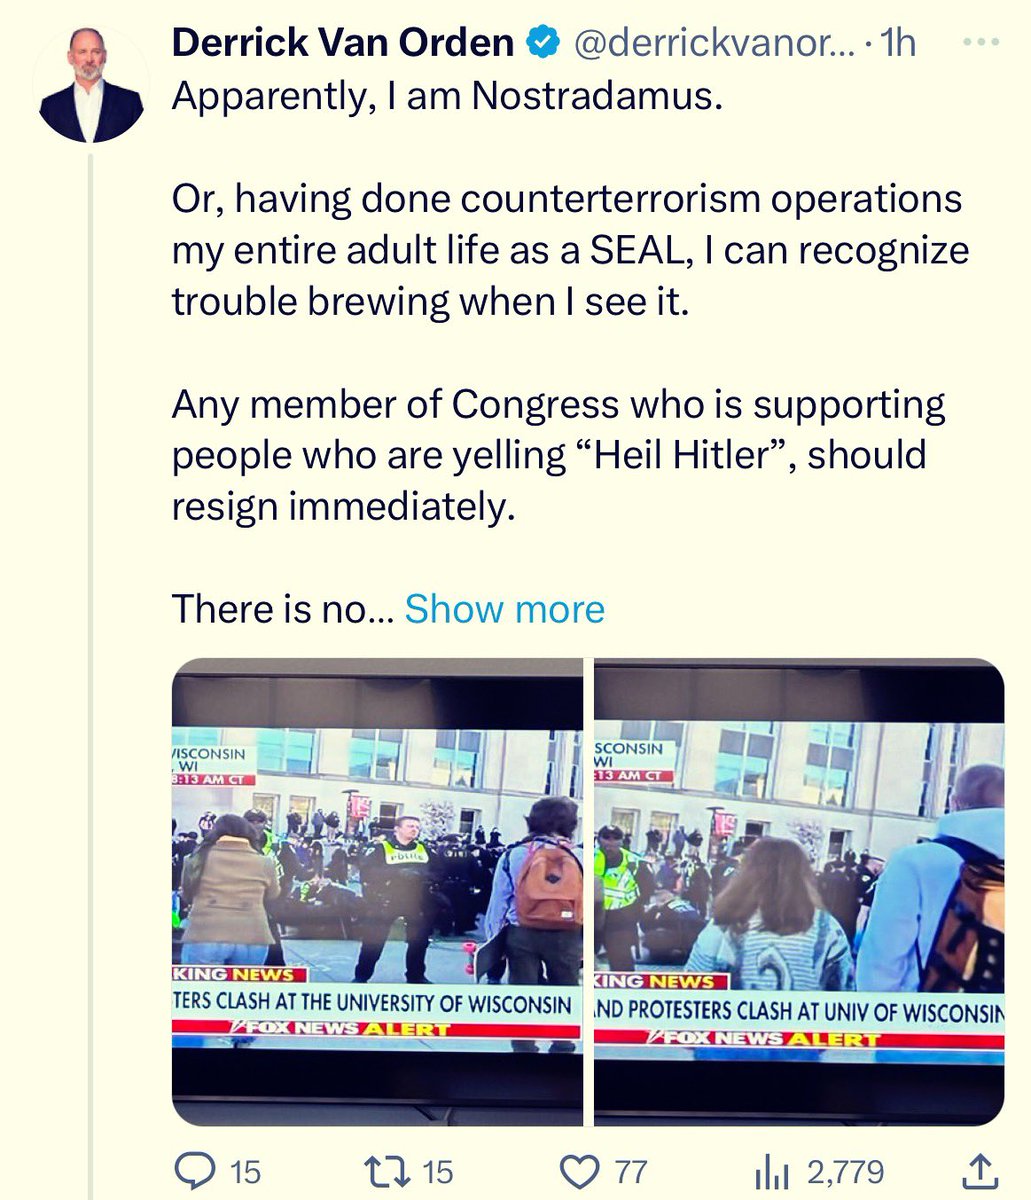 Utterly dishonest Derrick Van Orden is recklessly (and falsely) claiming that a member of Congress “is supporting people who are yelling ‘Heil Hitler.’” This is absolutely despicable and cowardly innuendo. Call for his immediate resignation. @LaCrosseTribune